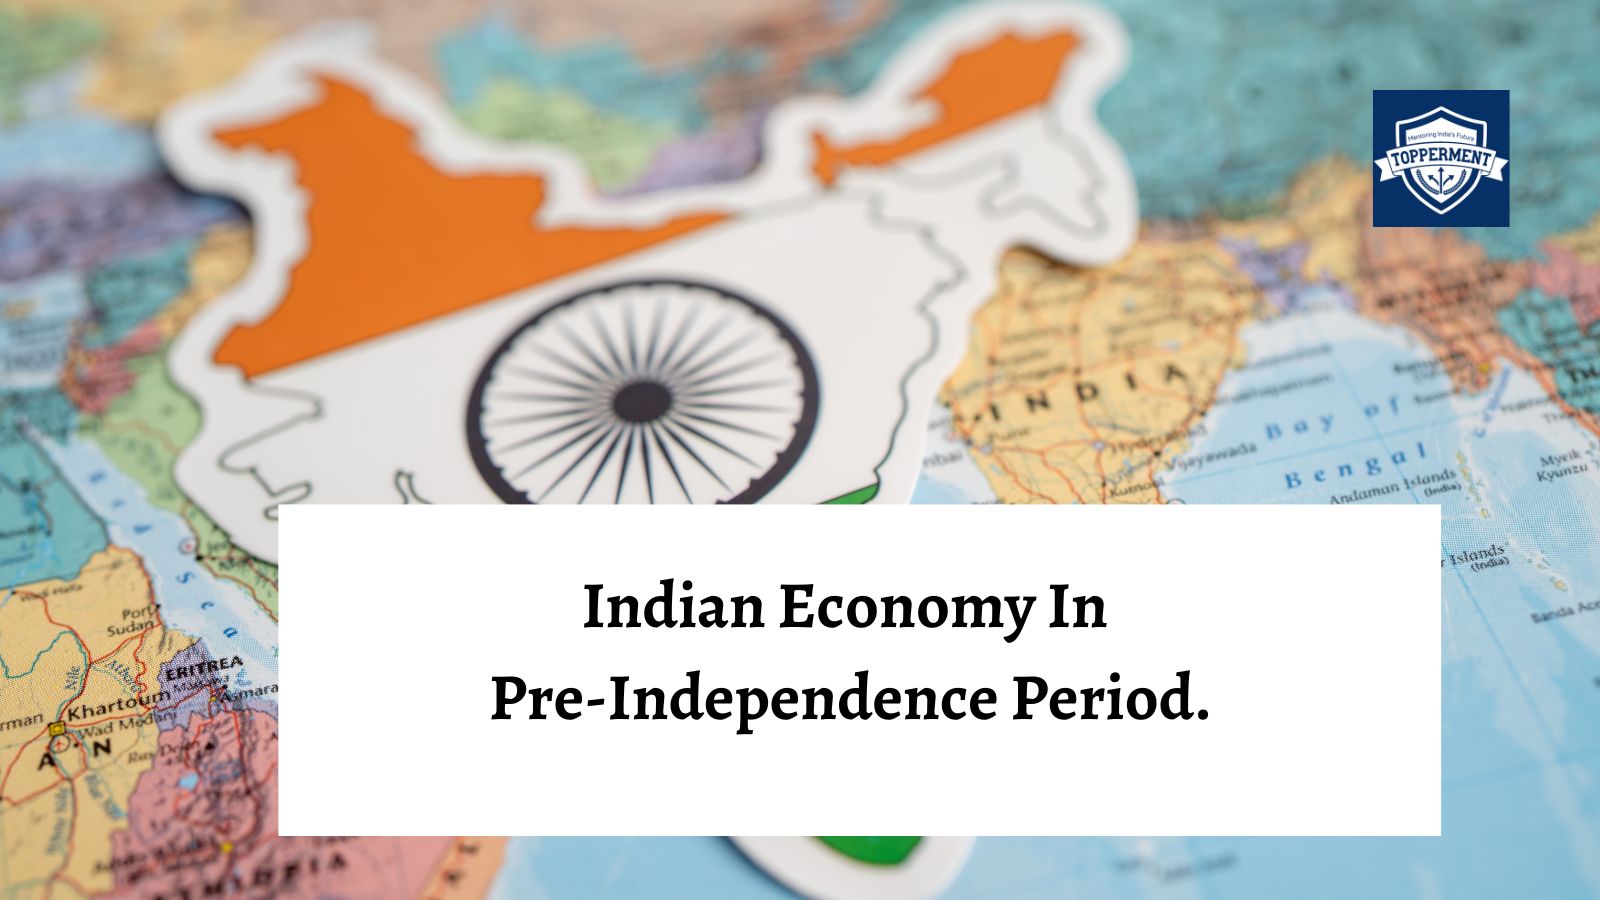 Indian Economy in the Pre-Independence Period: A Historical Overview-TopperMent